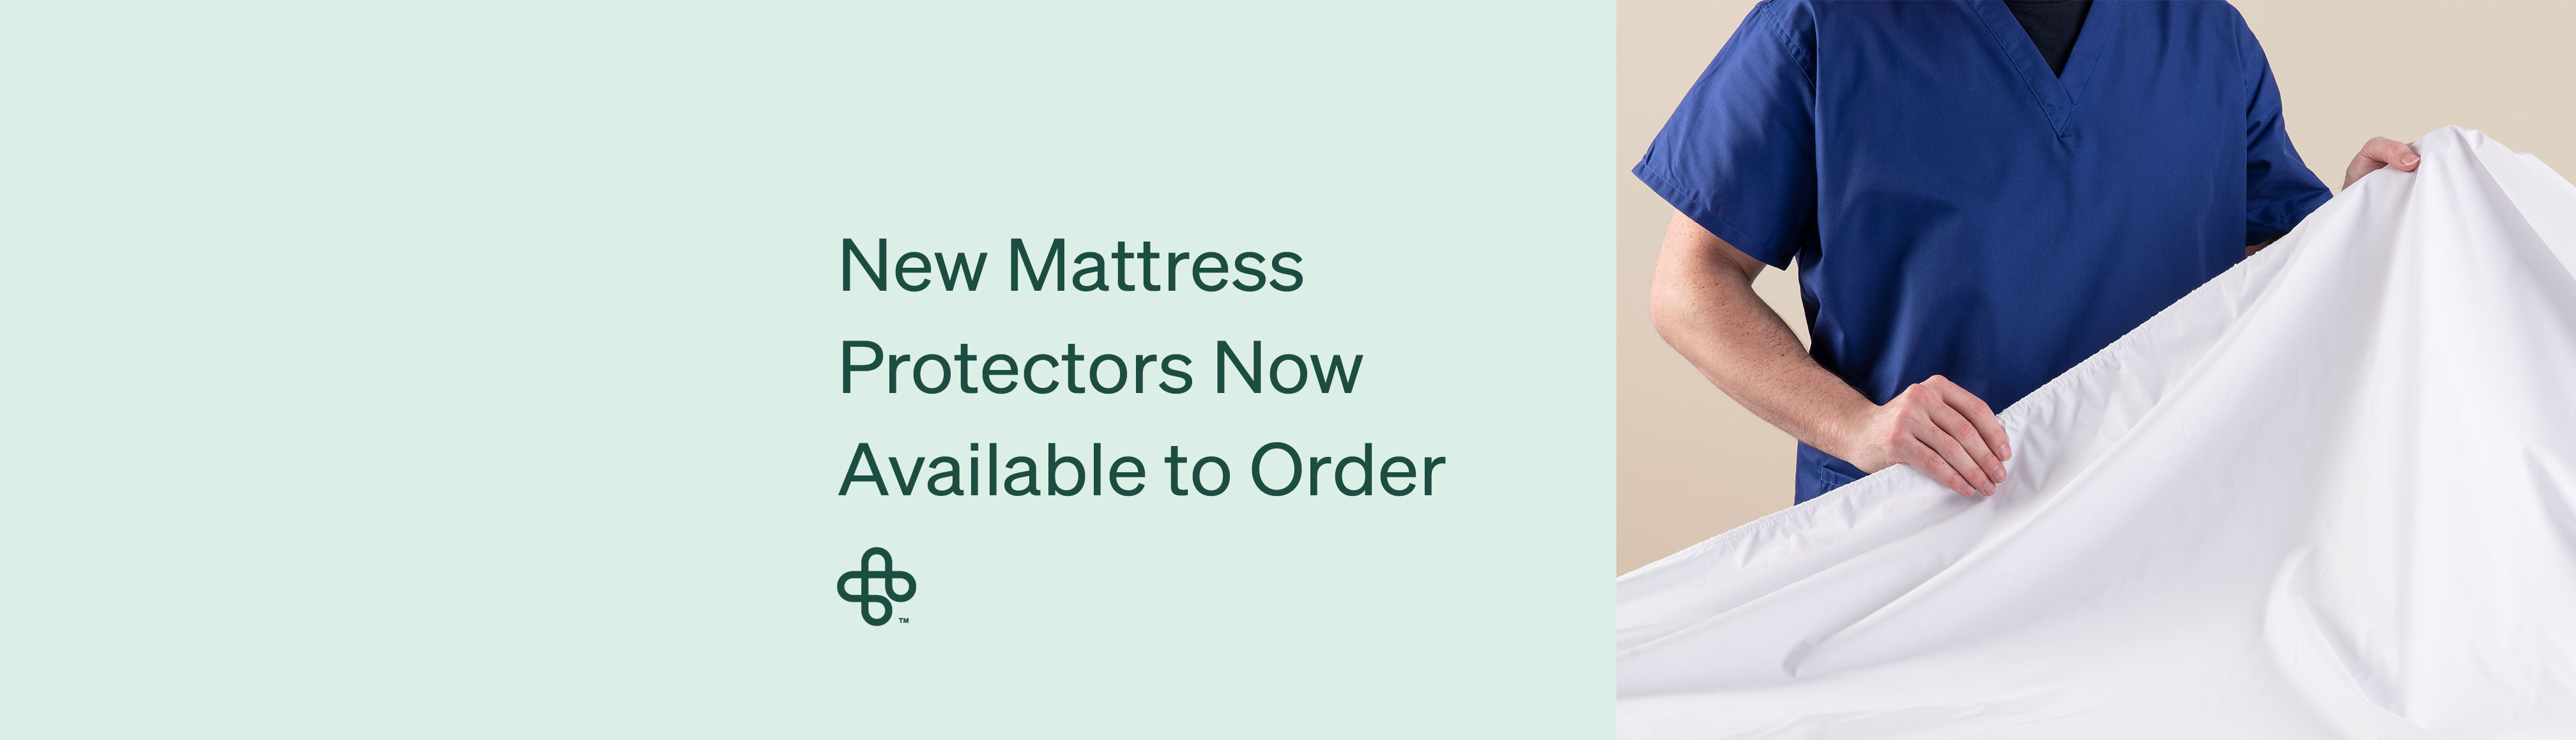 New Mattress Protectors Now Available to Order